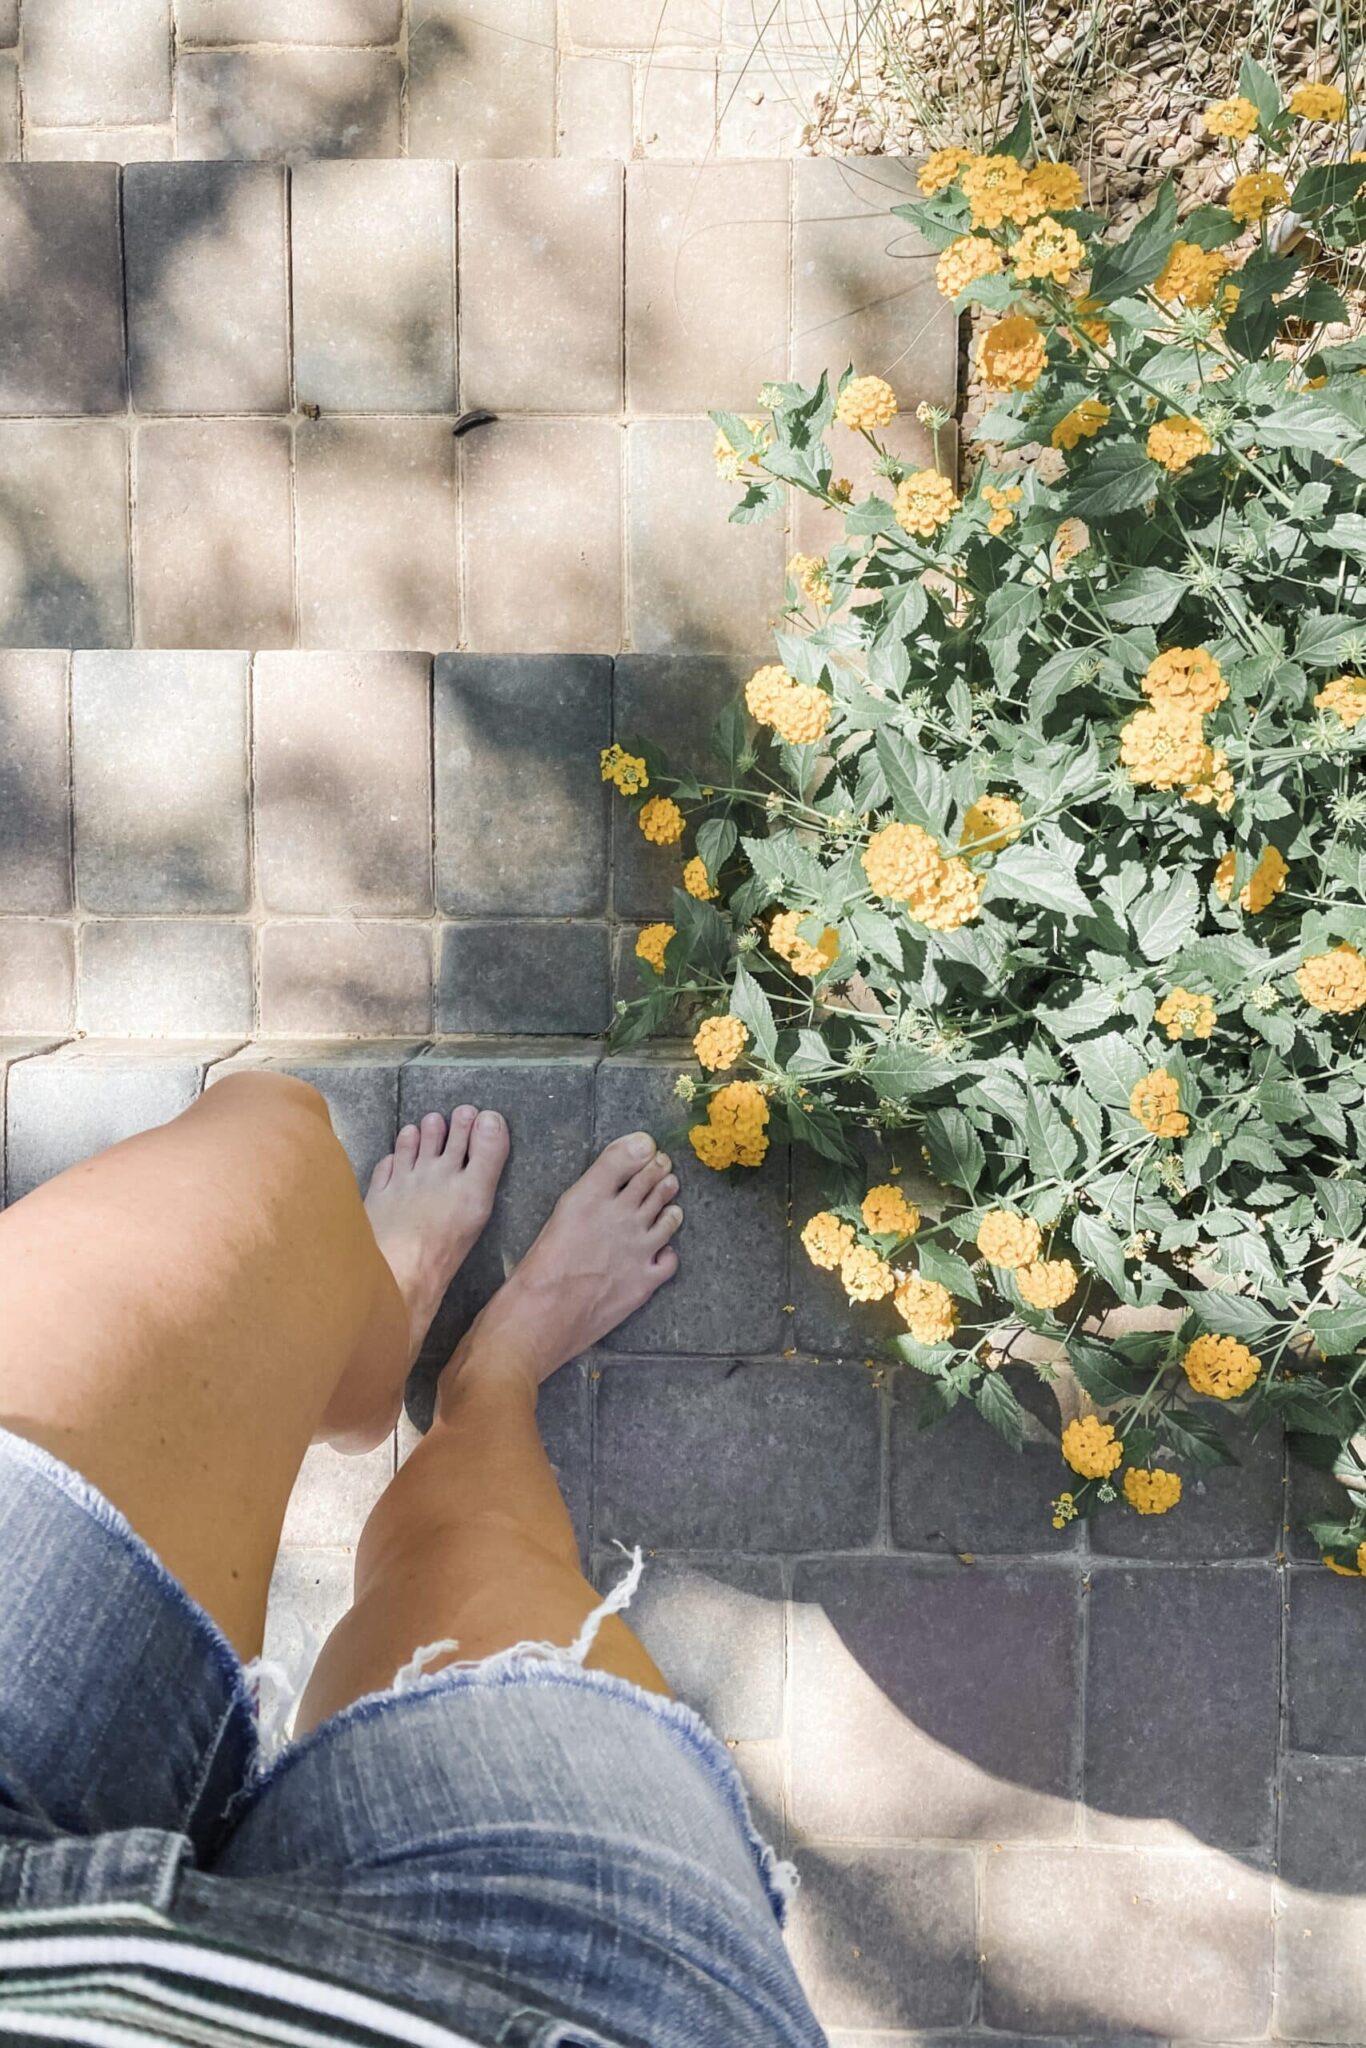 A woman standing on concrete steps outside next to a bush with yellow flowers.